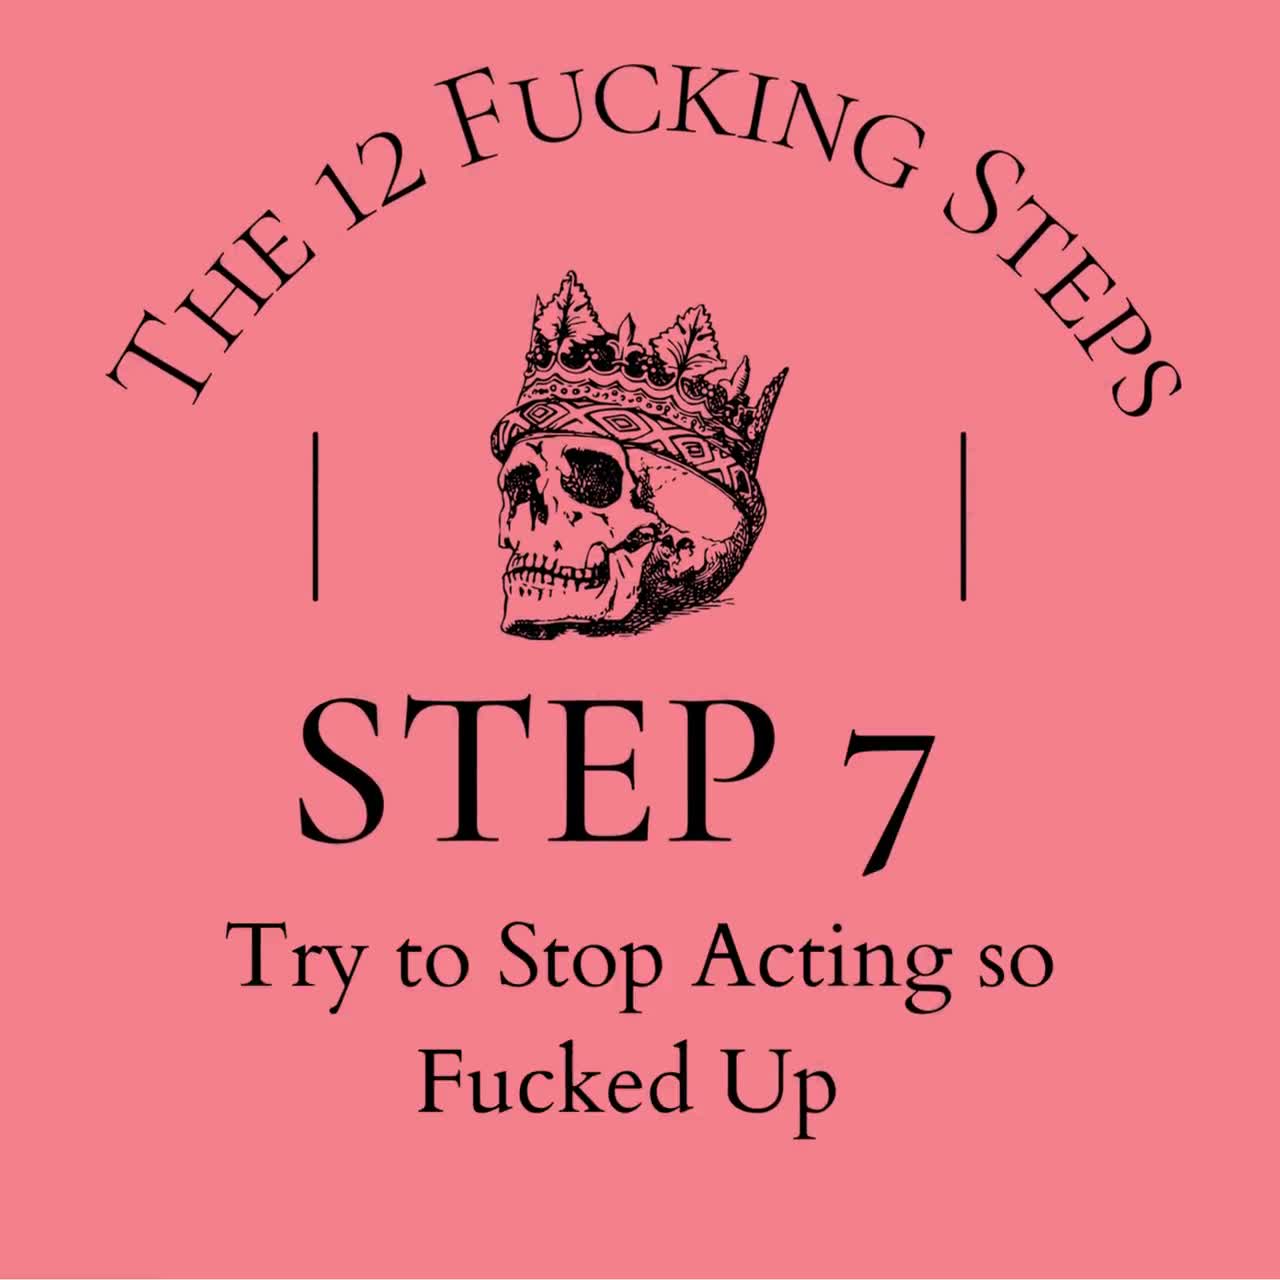 The 12 Fucking Steps takes cock